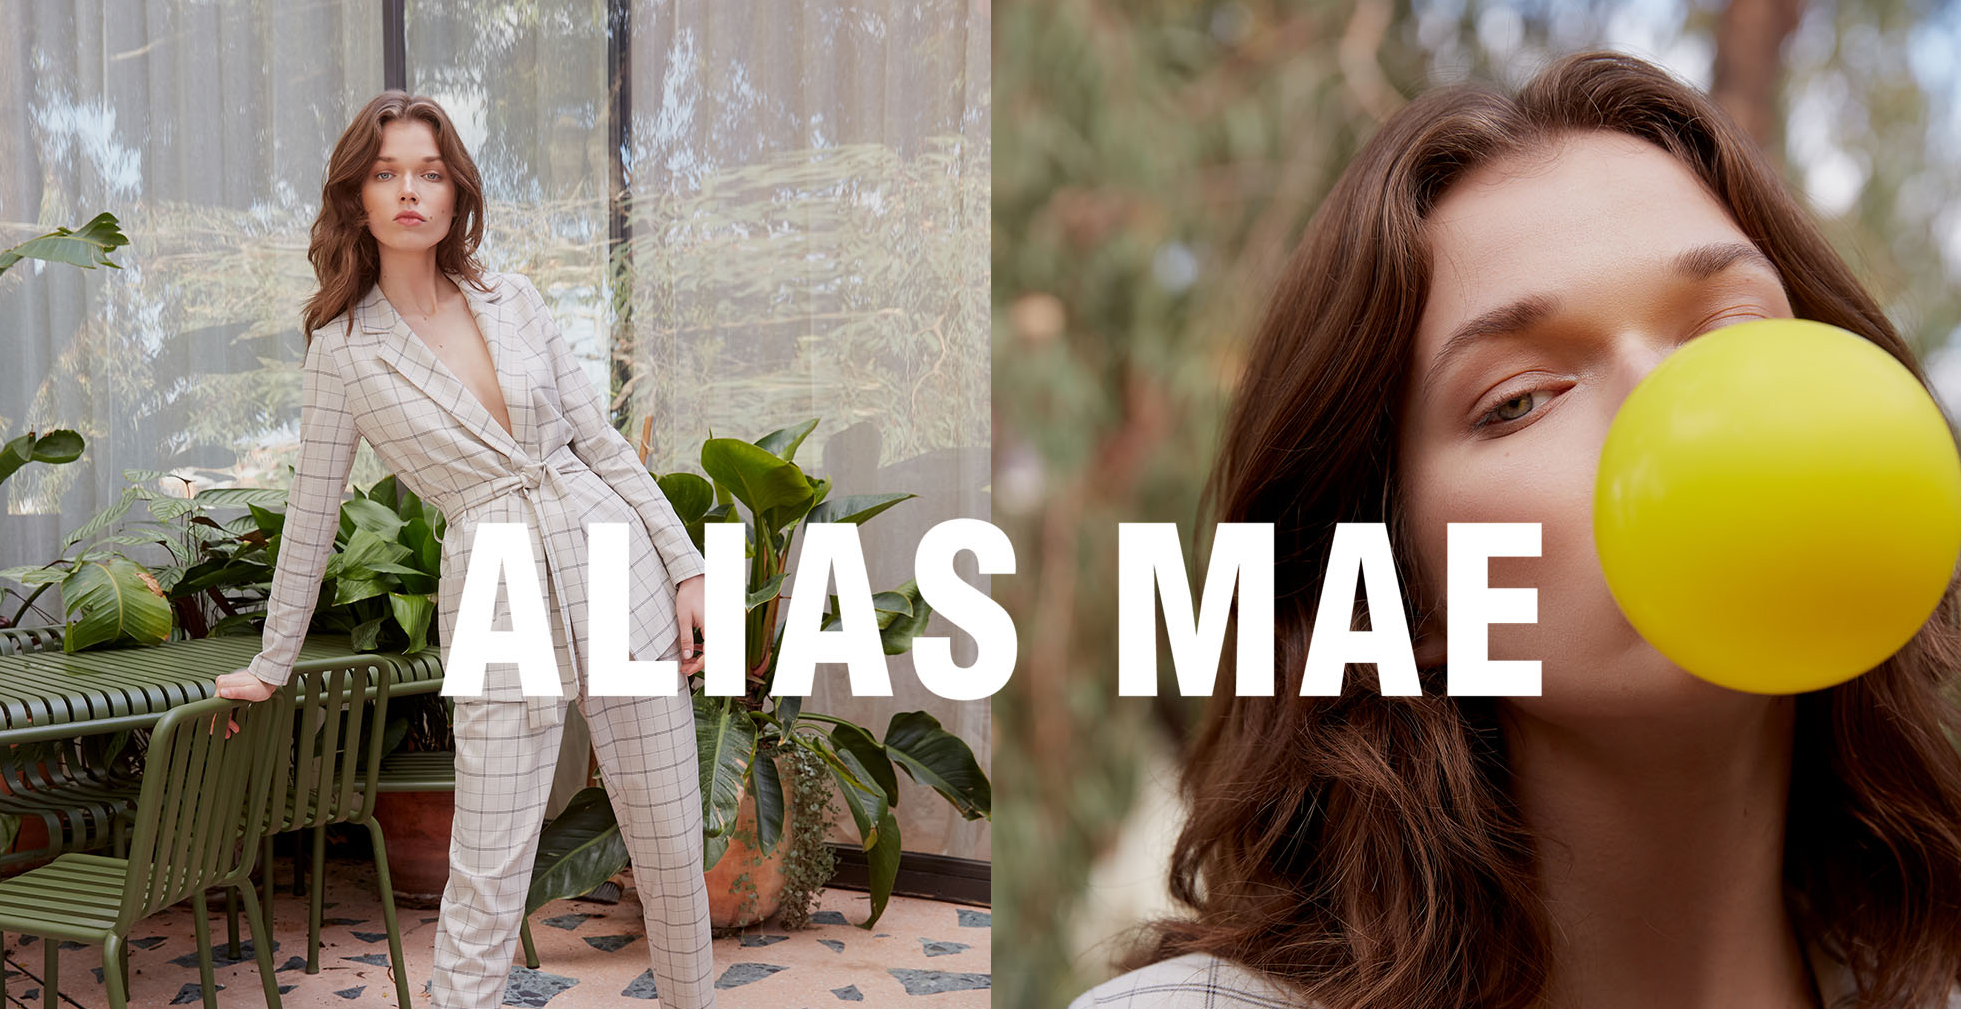 Get 15% OFF your first purchase when you sign up @ Alias Mae